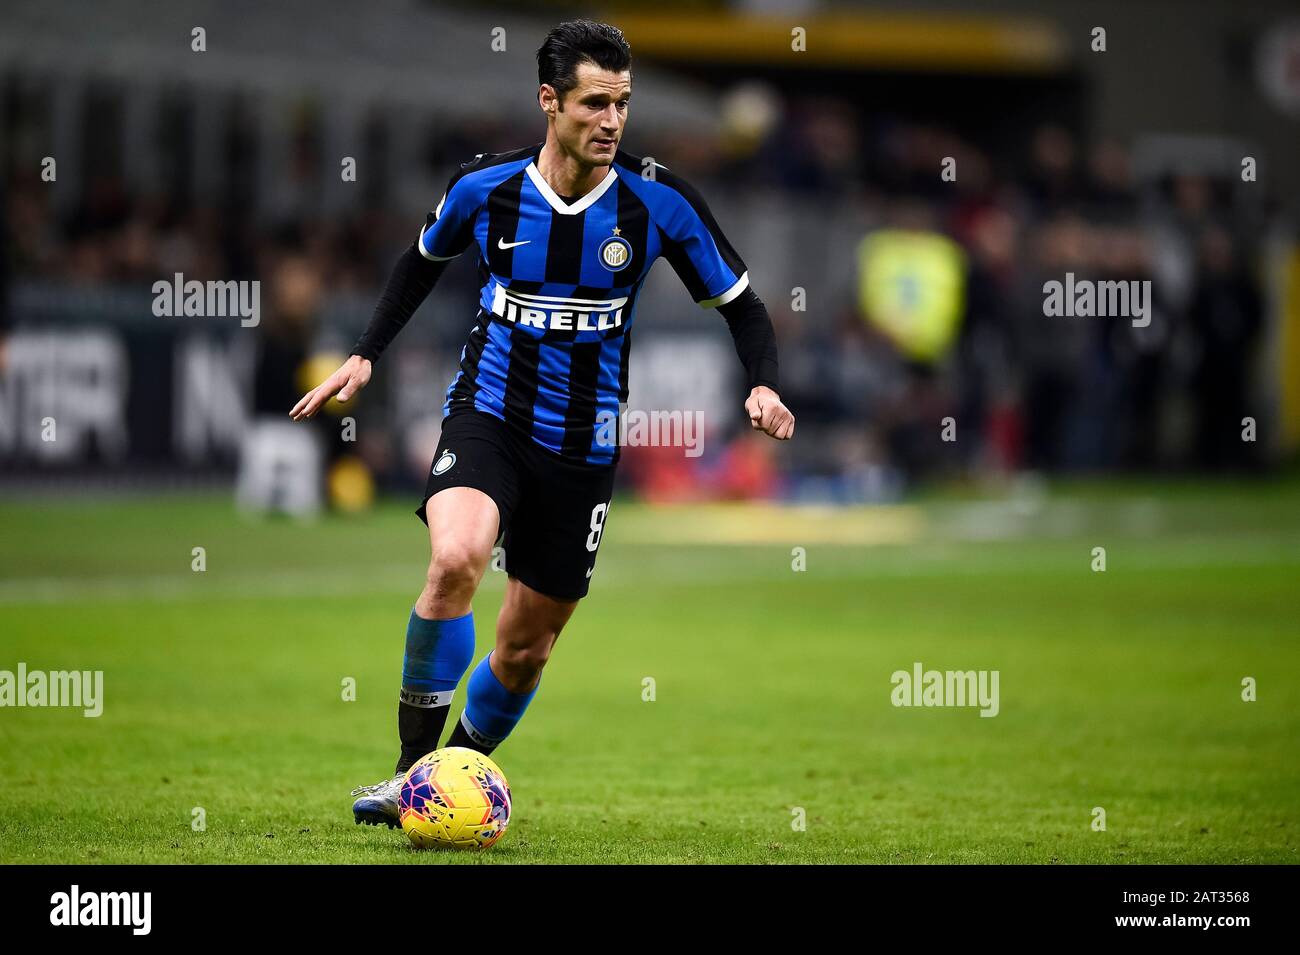 Milan, Italy - 29 January, 2020: Antonio Candreva of FC Internazionale in action during the Coppa Italia football match between FC Internazionale and ACF Fiorentina. FC Internazionale won 2-1 over ACF Fiorentina. Credit: Nicolò Campo/Alamy Live News Stock Photo